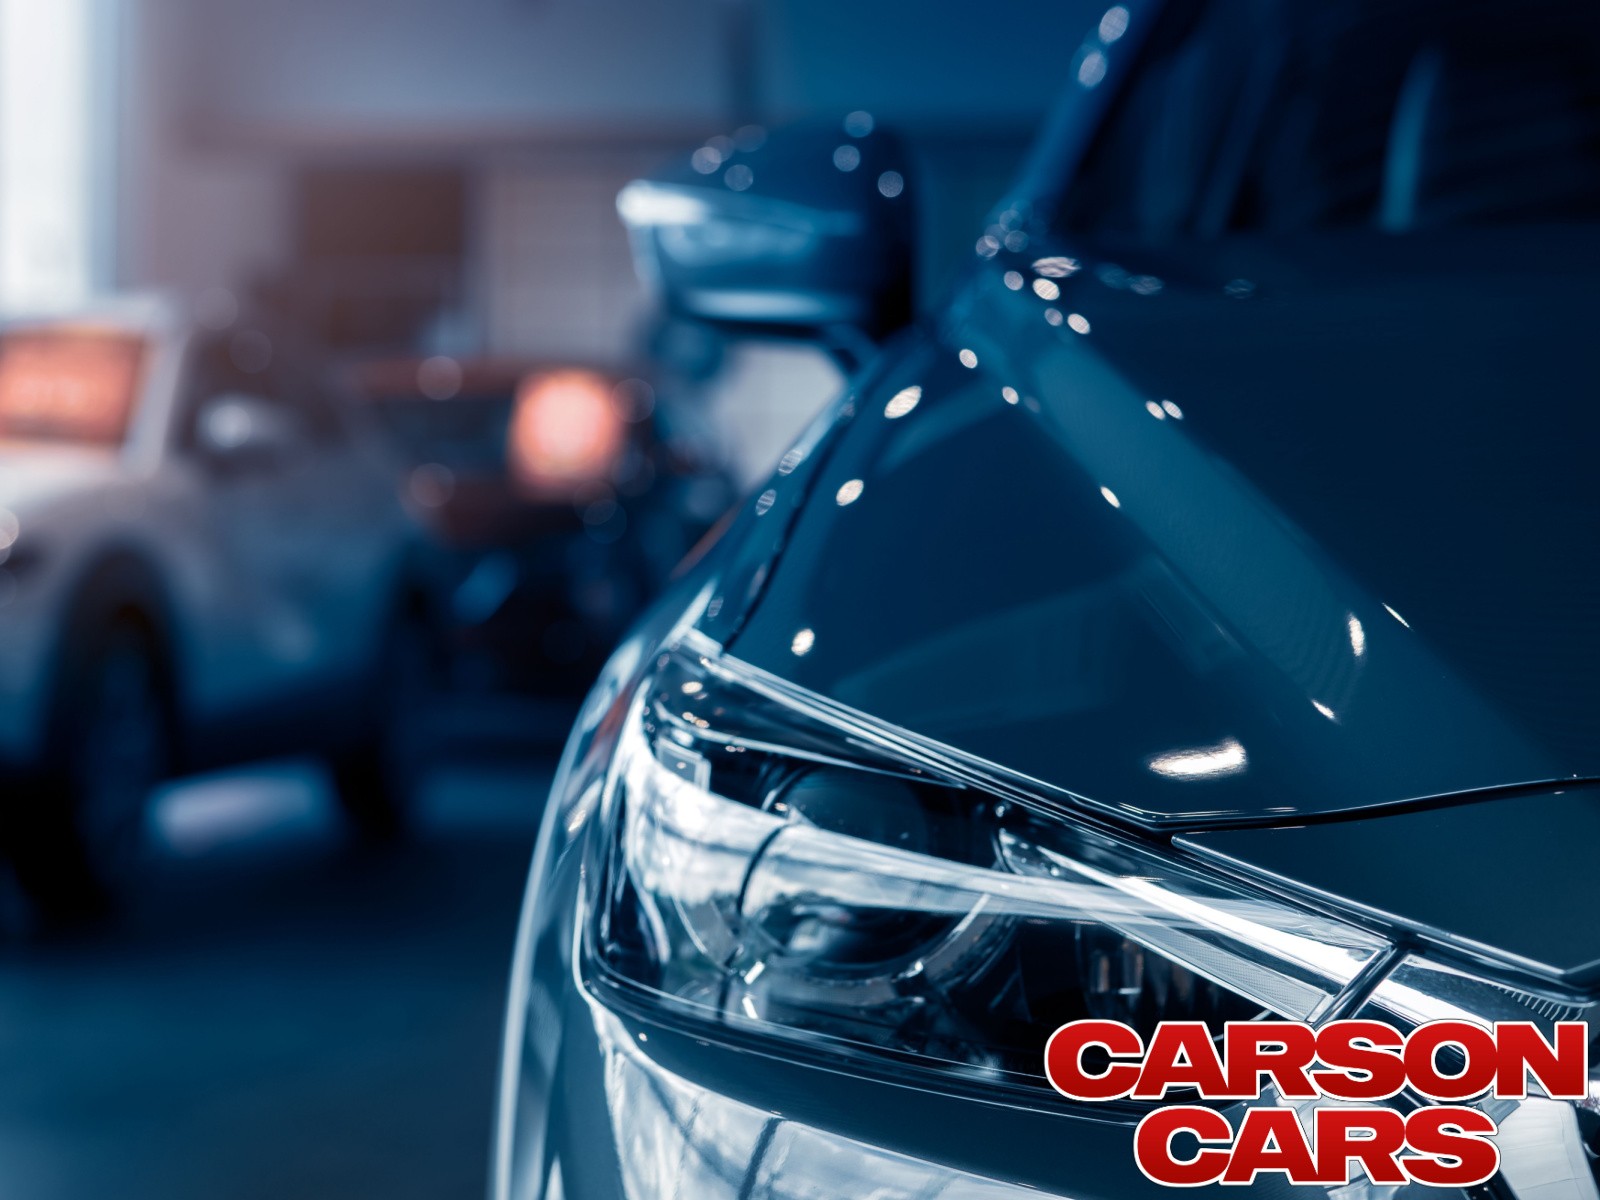 Find Affordable Cars for Every Kind of Budget!